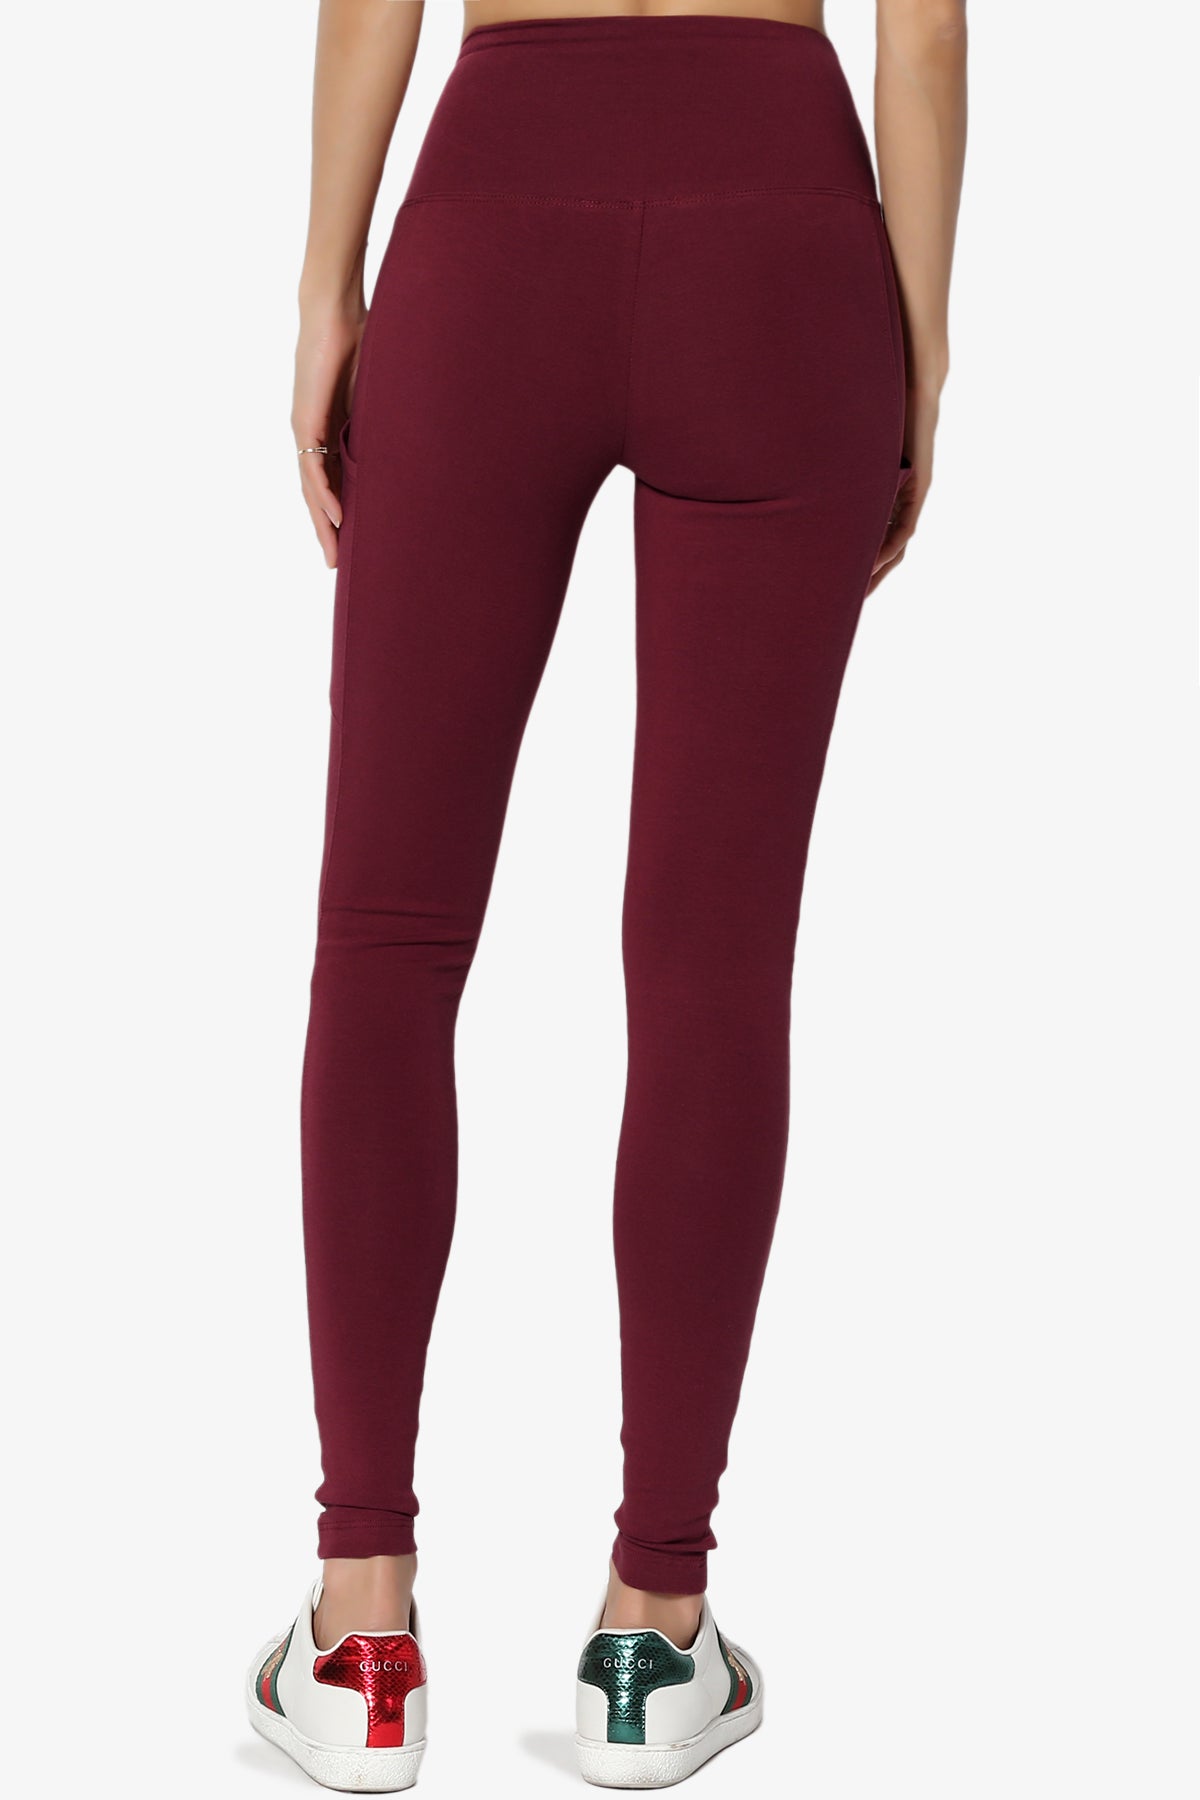 Ansley Luxe Cotton Leggings with Pockets DARK BURGUNDY_2